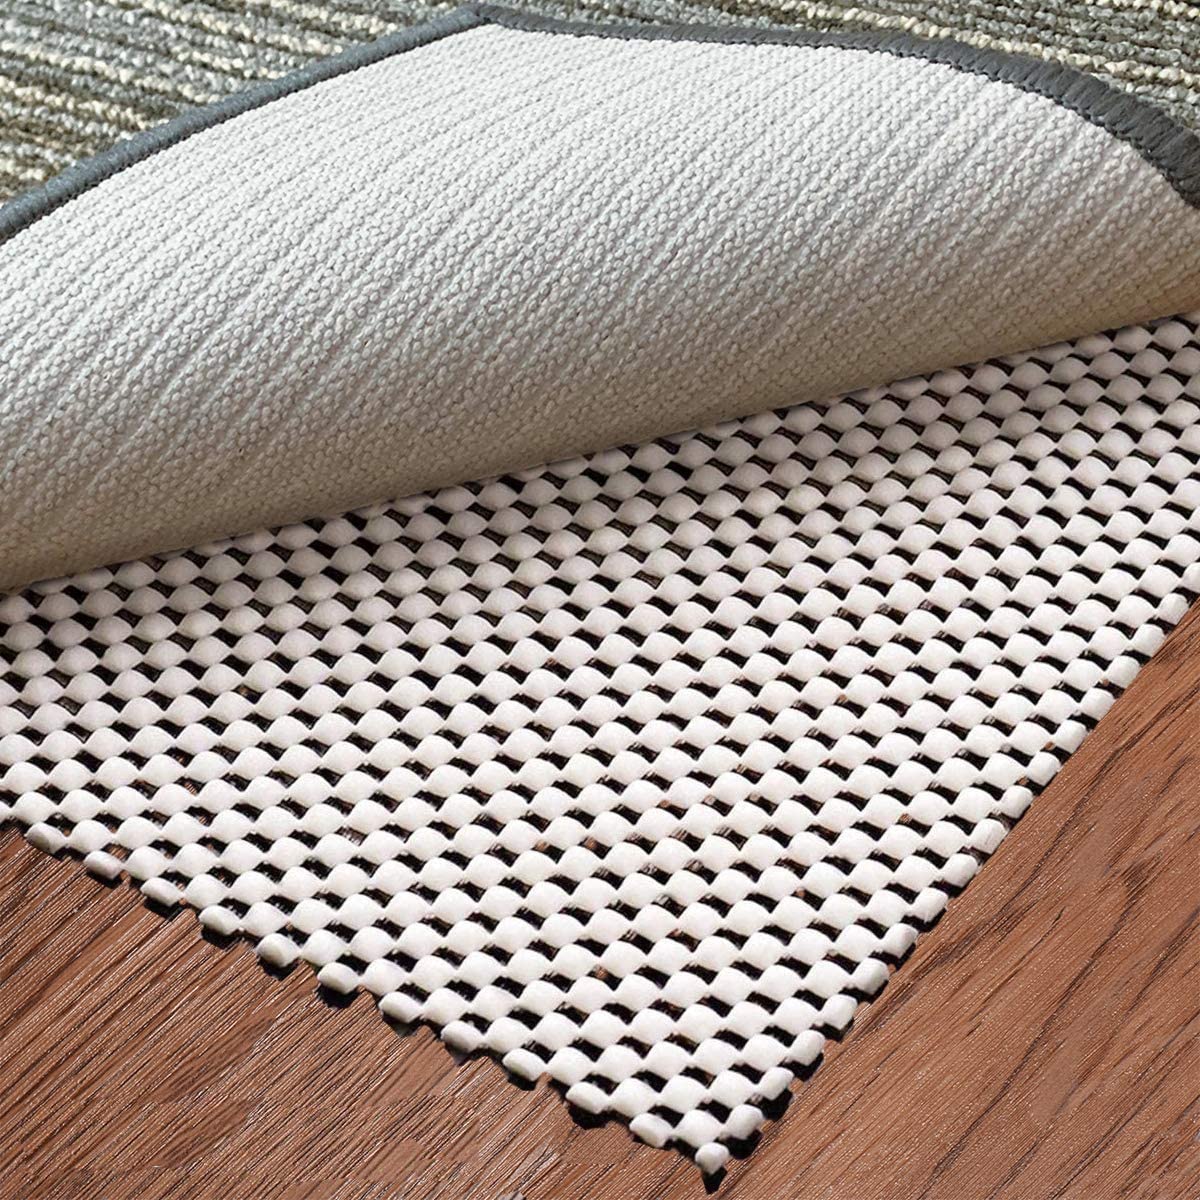 Rug Pad 5 x 8 Ft Non-Slip Extra Thick Gripper for Any Hard Surface Floors 